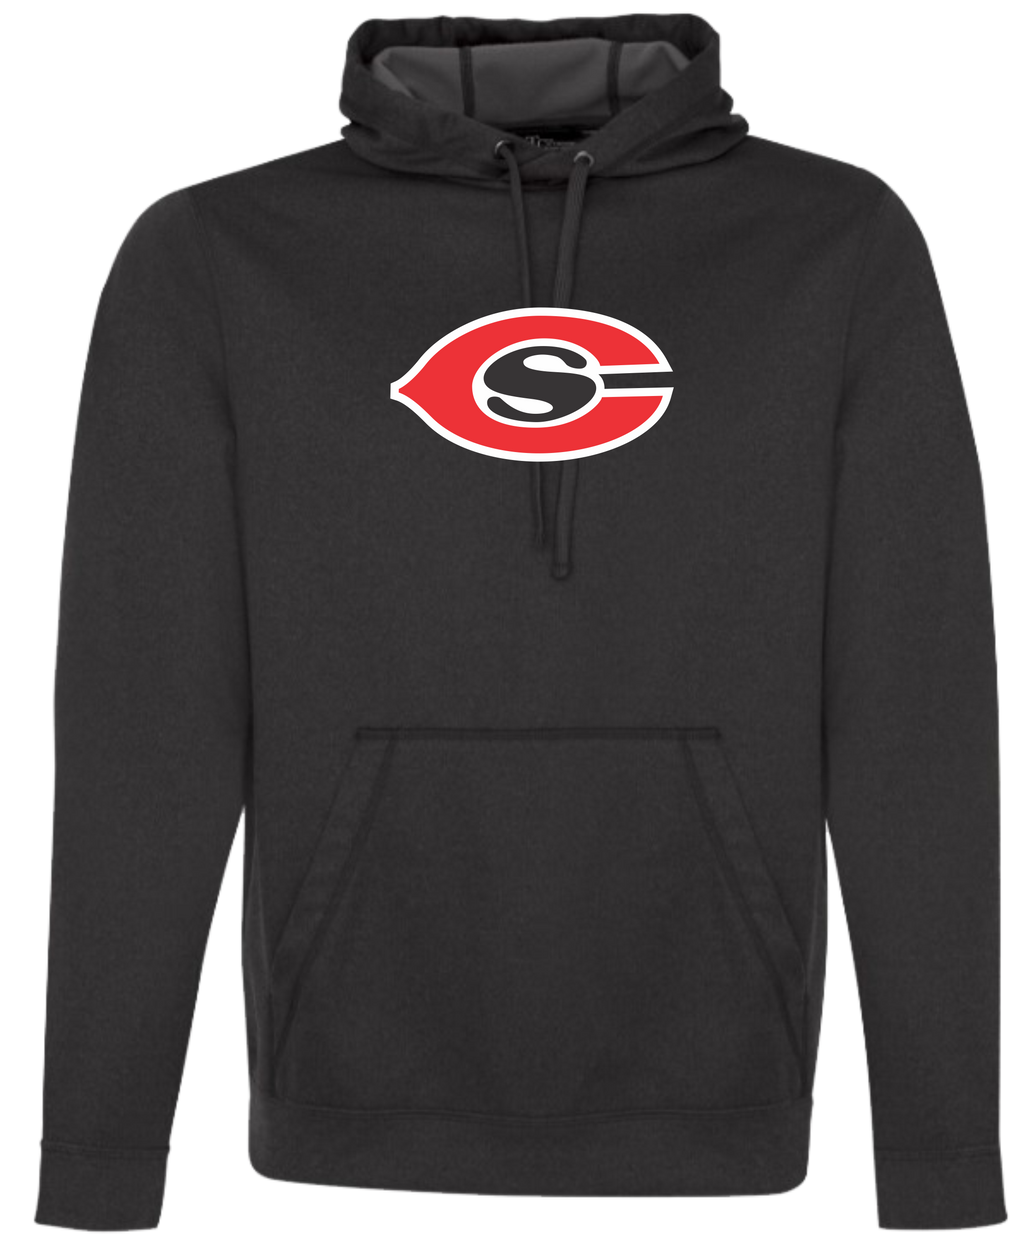 Central Saanich Little League Unisex and Youth DriFit PullOver Hoodie